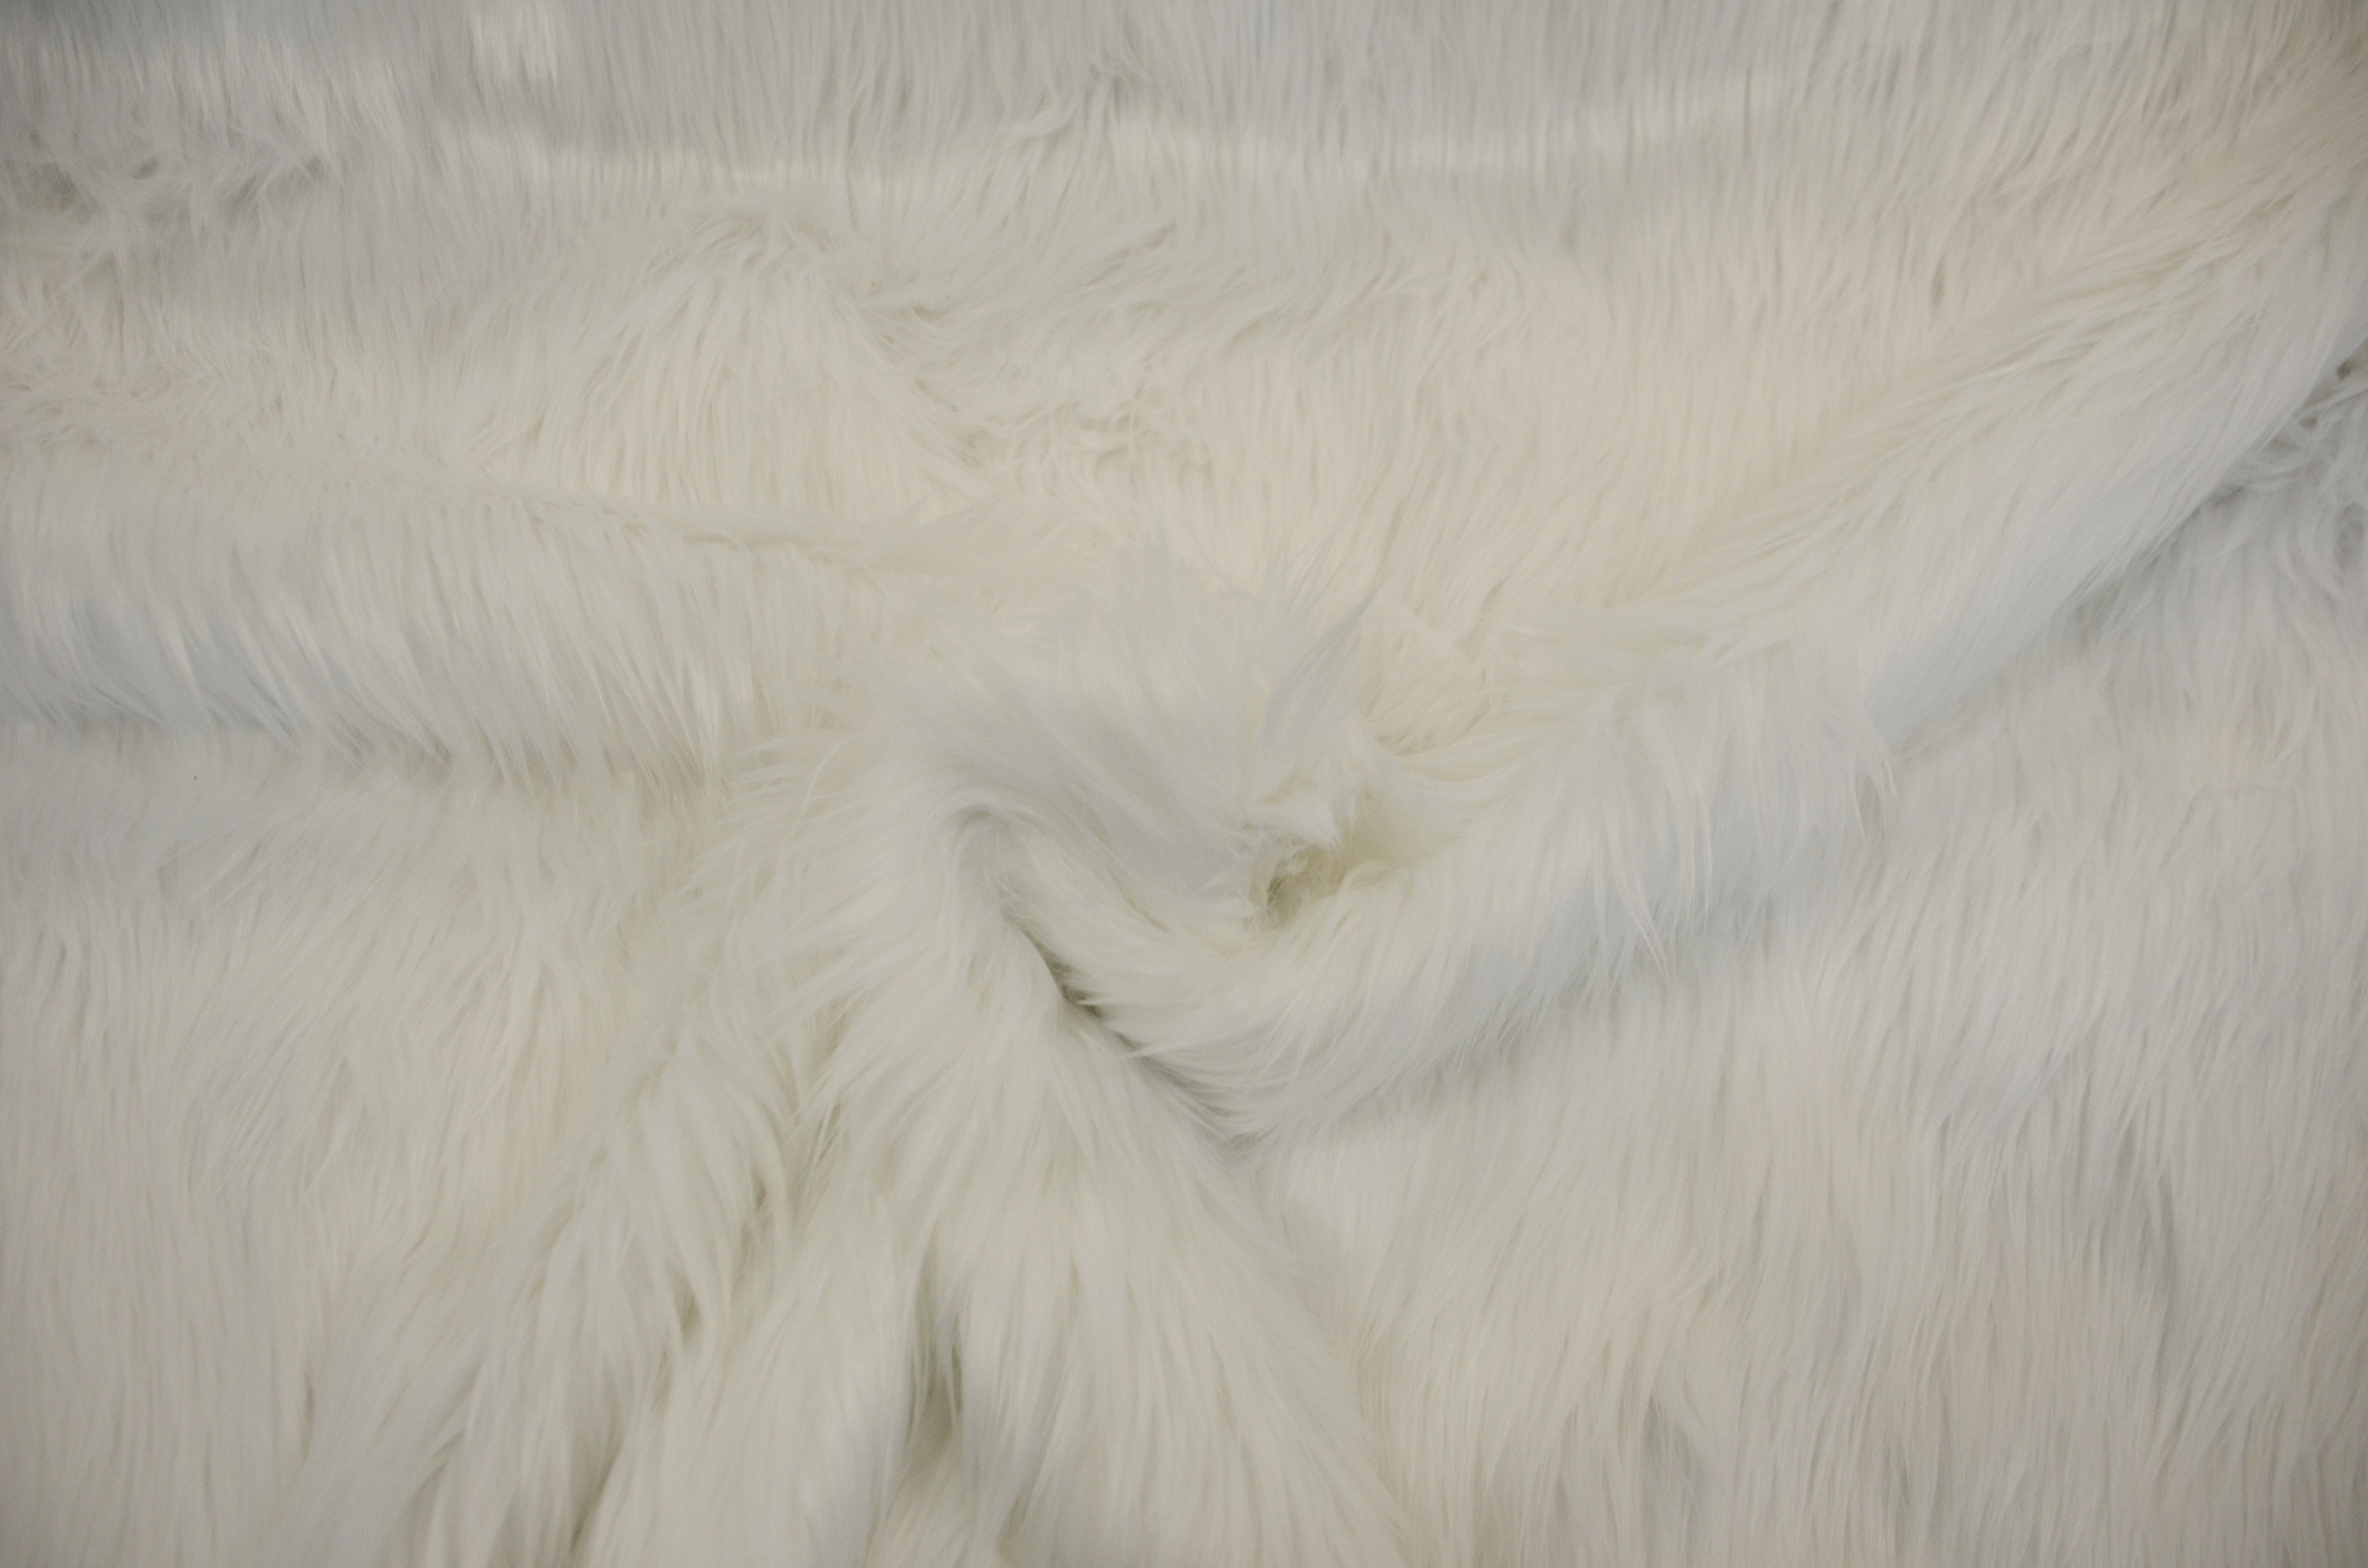 Vintage White Faux Fur Fabric, 60 wide 2+ yards long, 1 thick –  originalwoolydragon